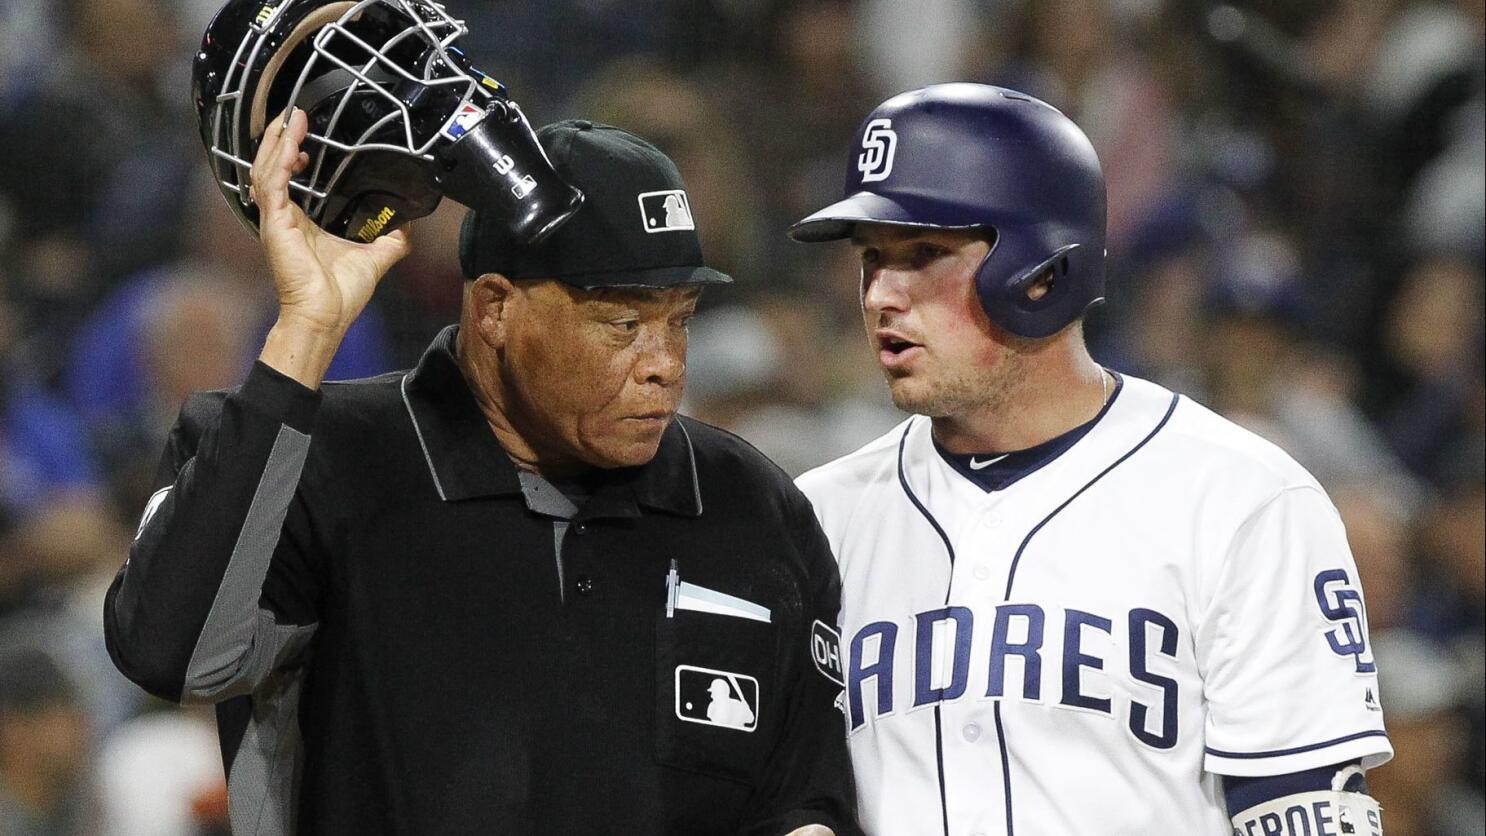 Padres' Hunter Renfroe thinks umpire Danley had a rough night, too